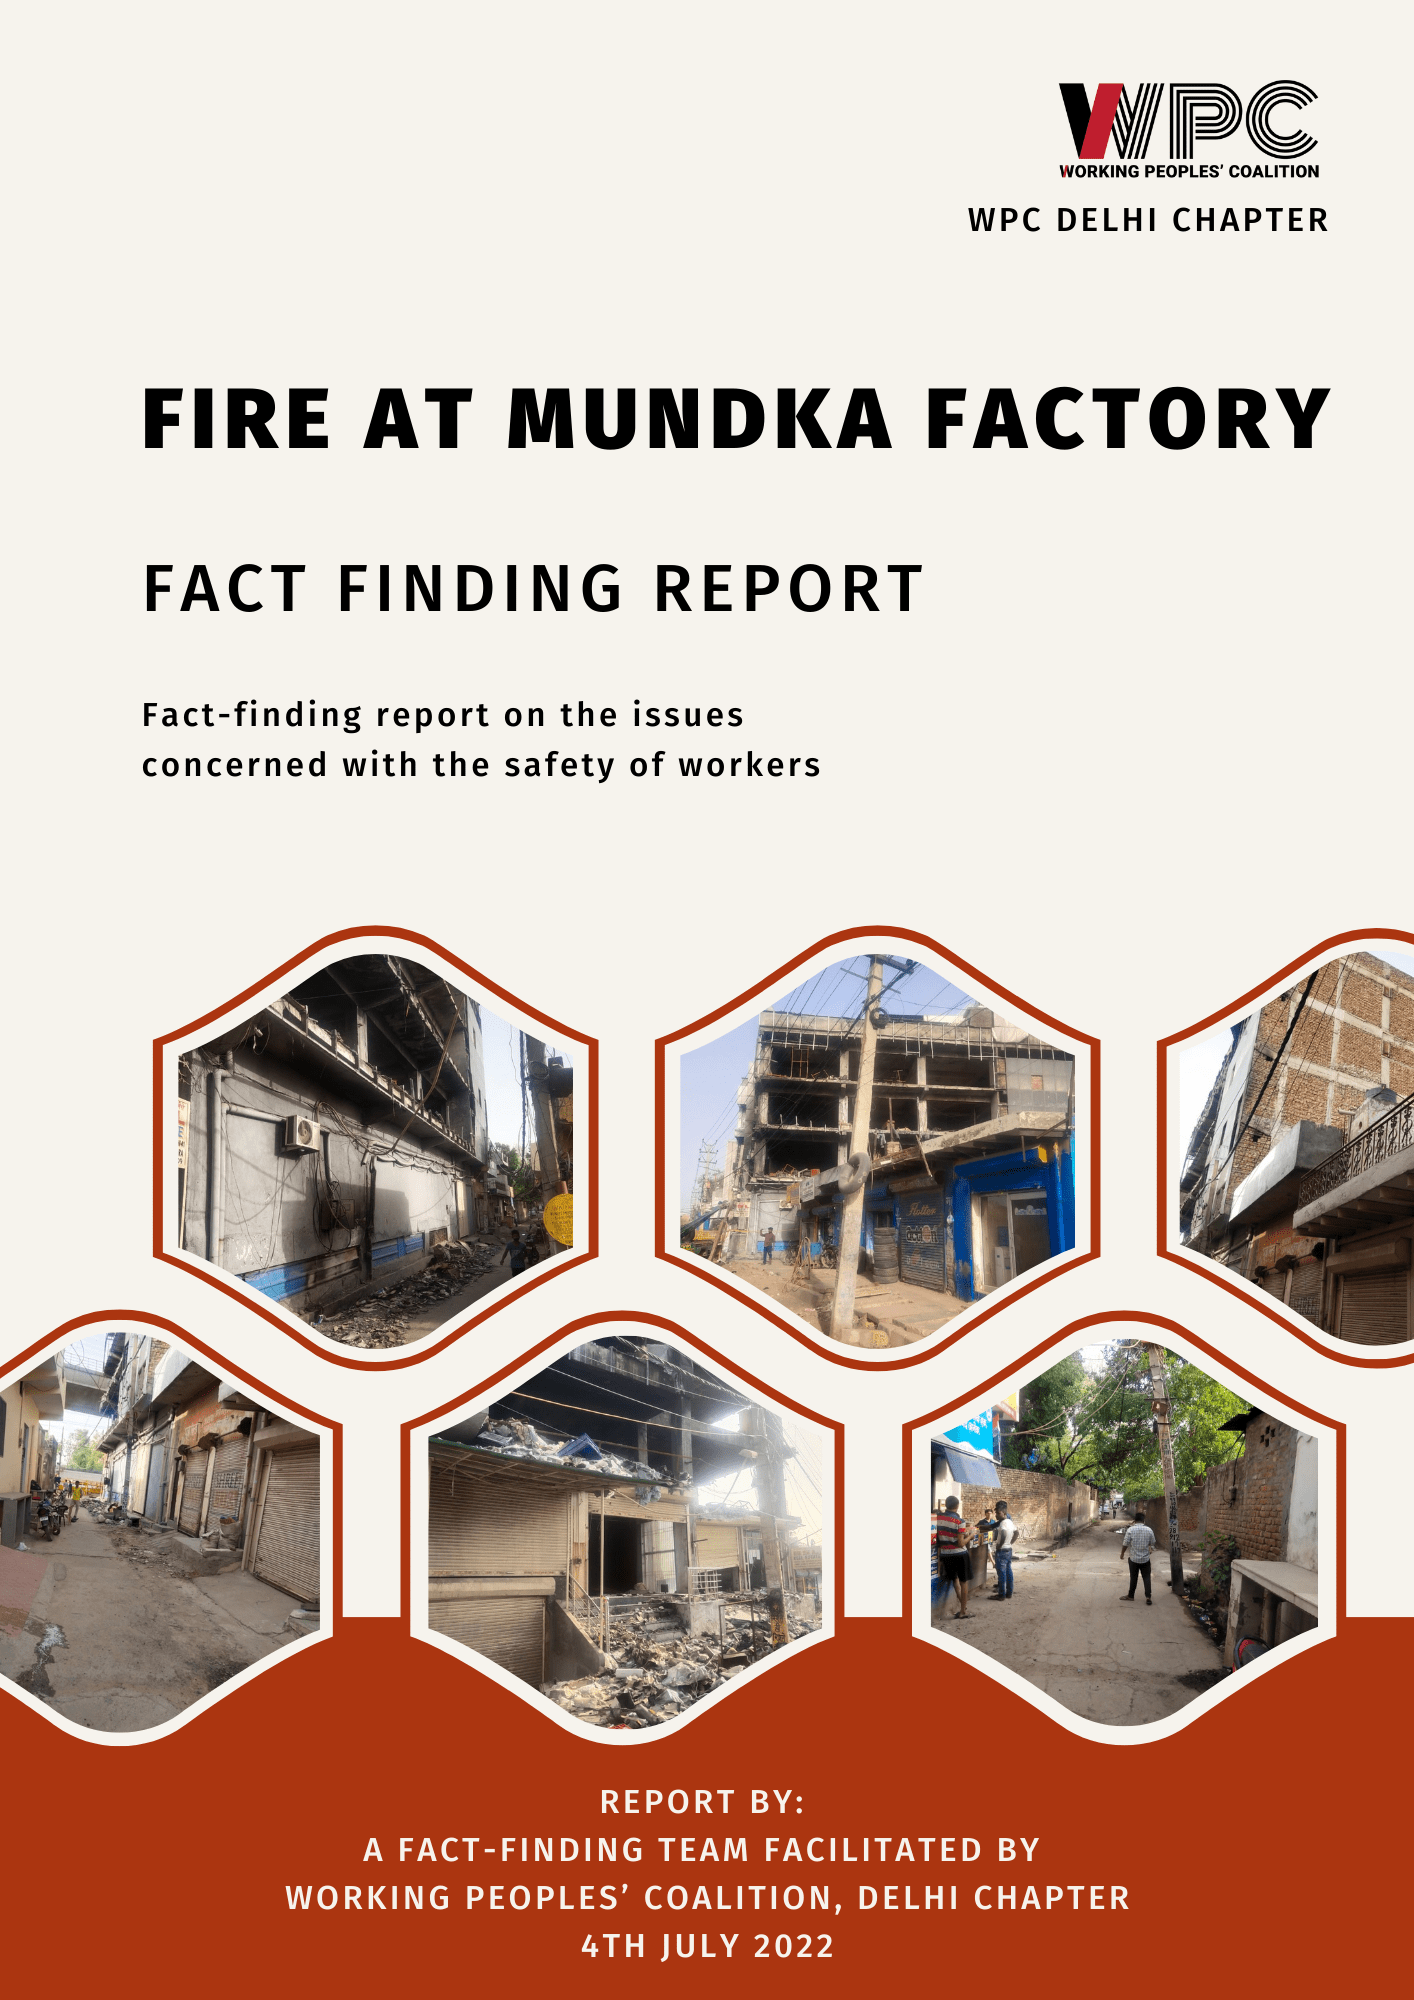 Delhi Mundka Factory Fire: A Culpable Homicide Occurred Due to States Negligence and Ignorance 